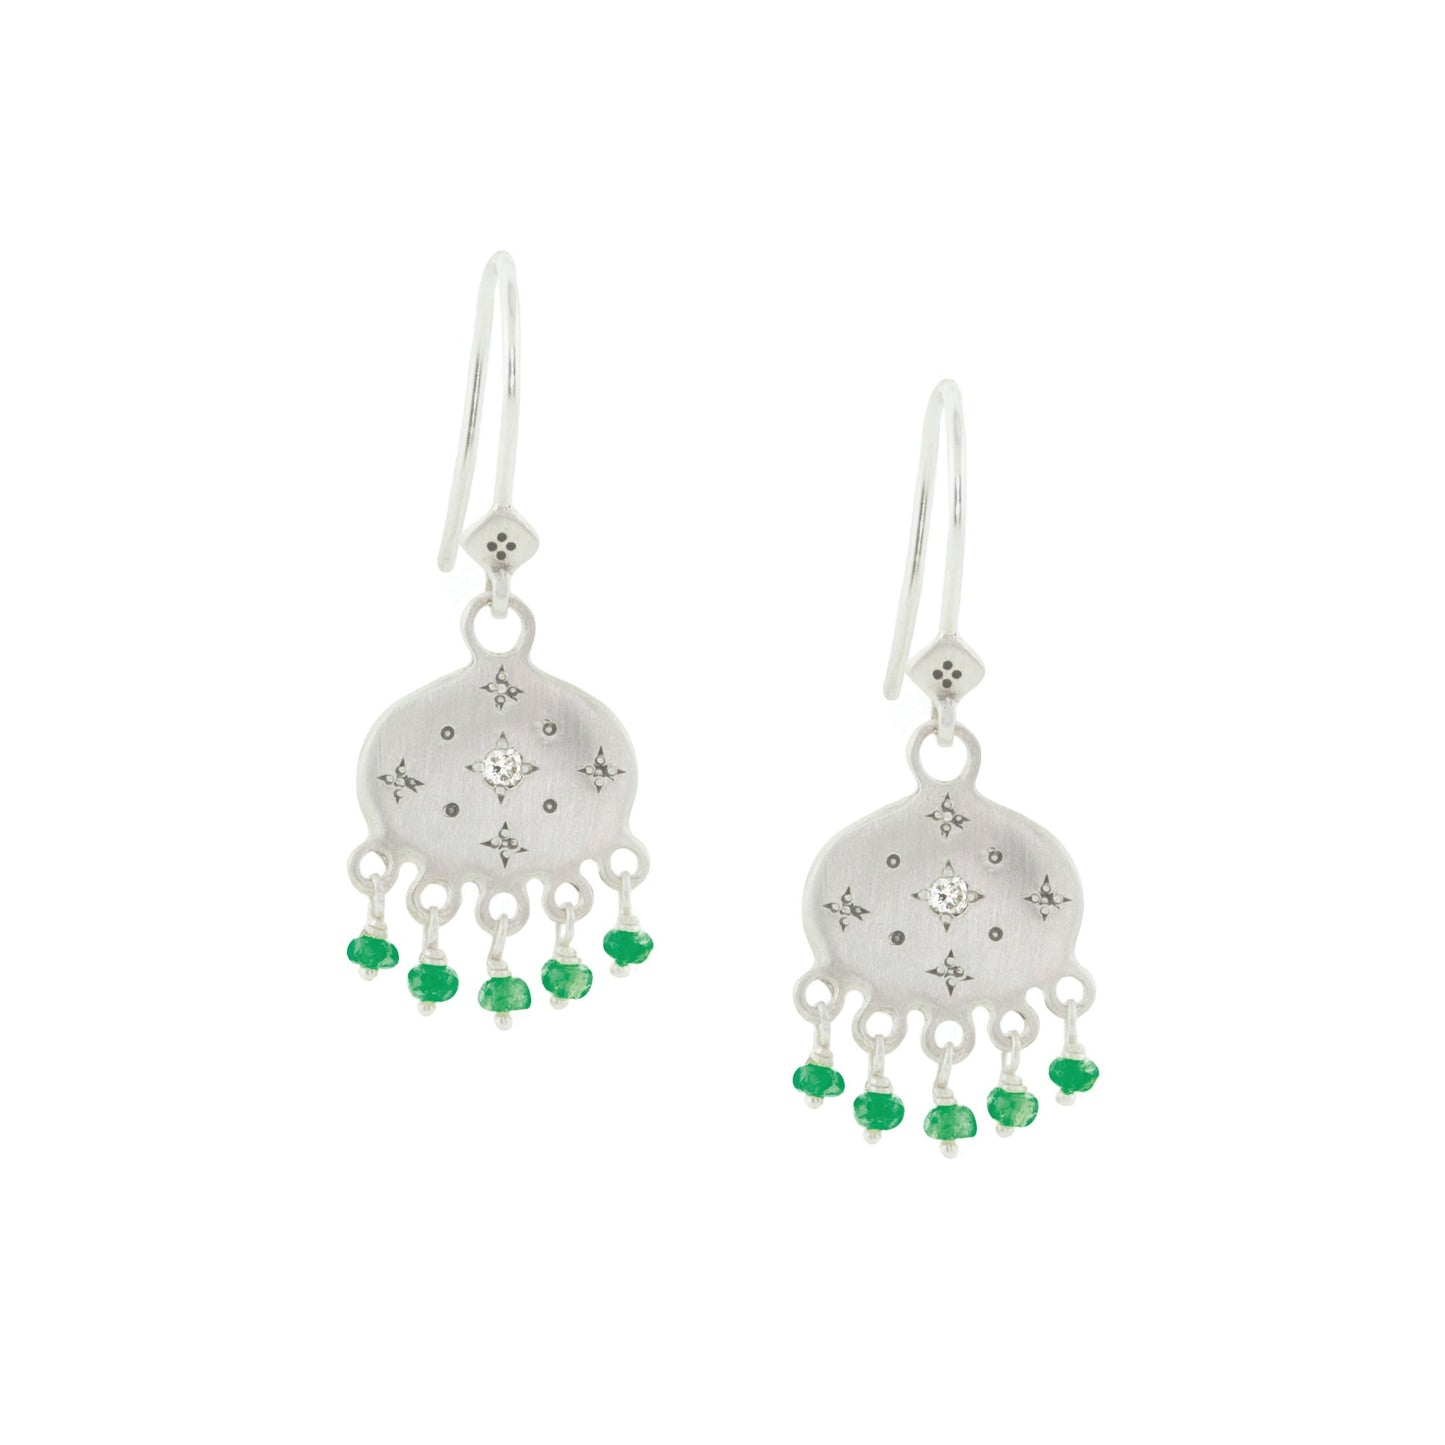 Beaded new Moon Earrings With Emeralds